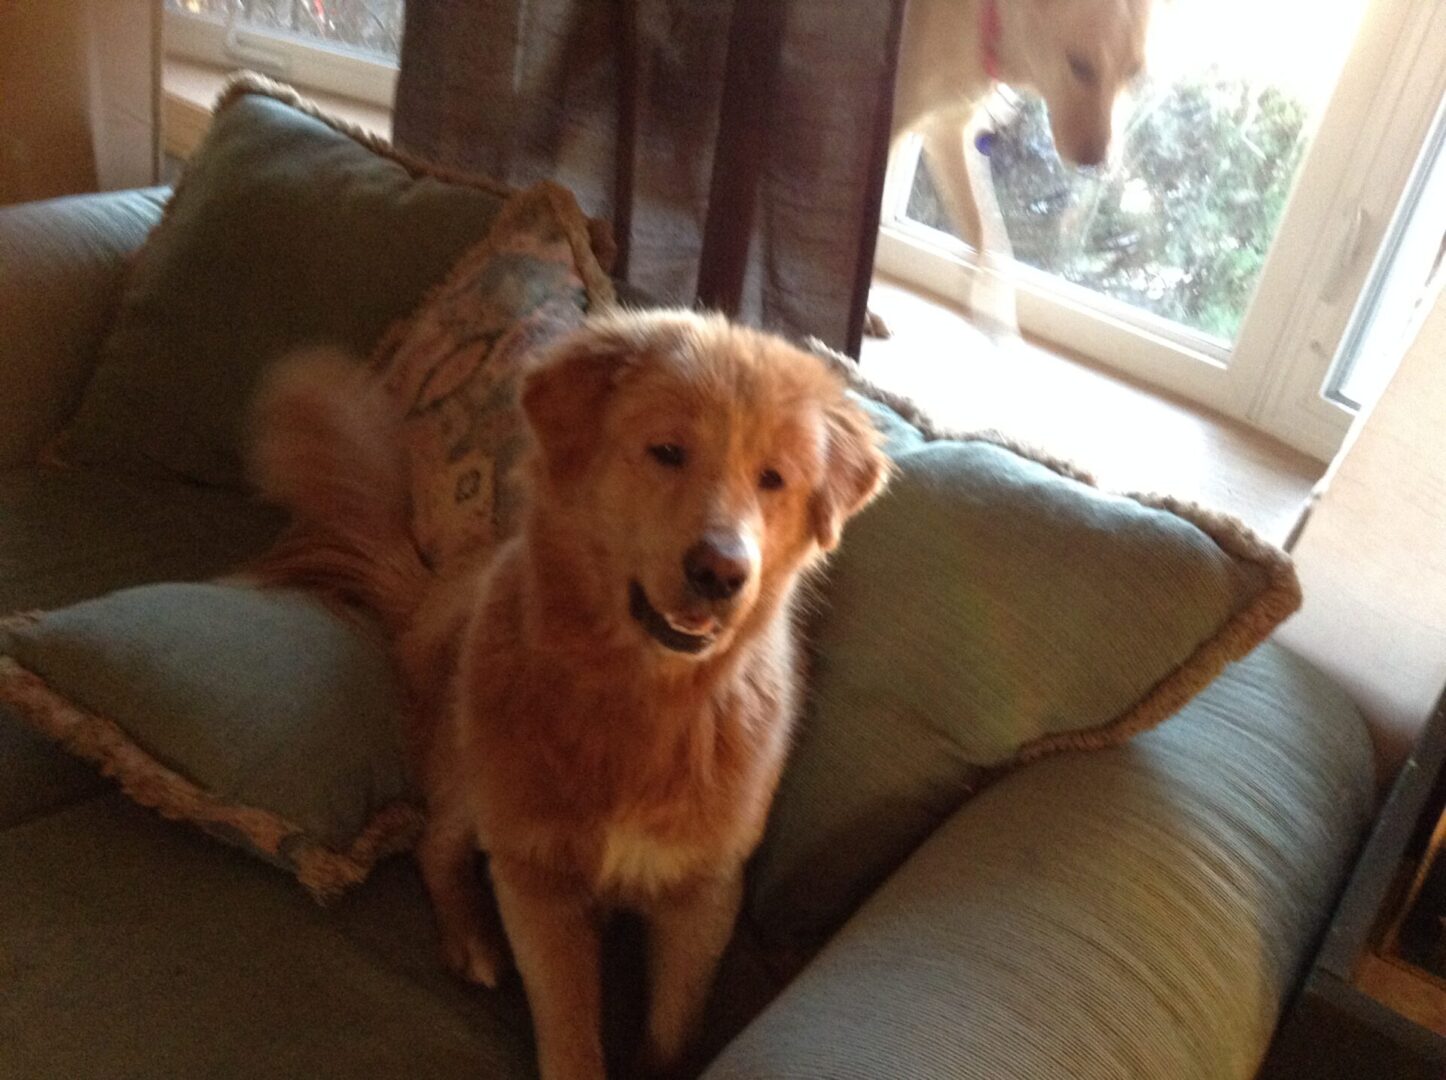 A golden dog sitting on a green couch with a pillow, glancing back with a reflection visible in the window.